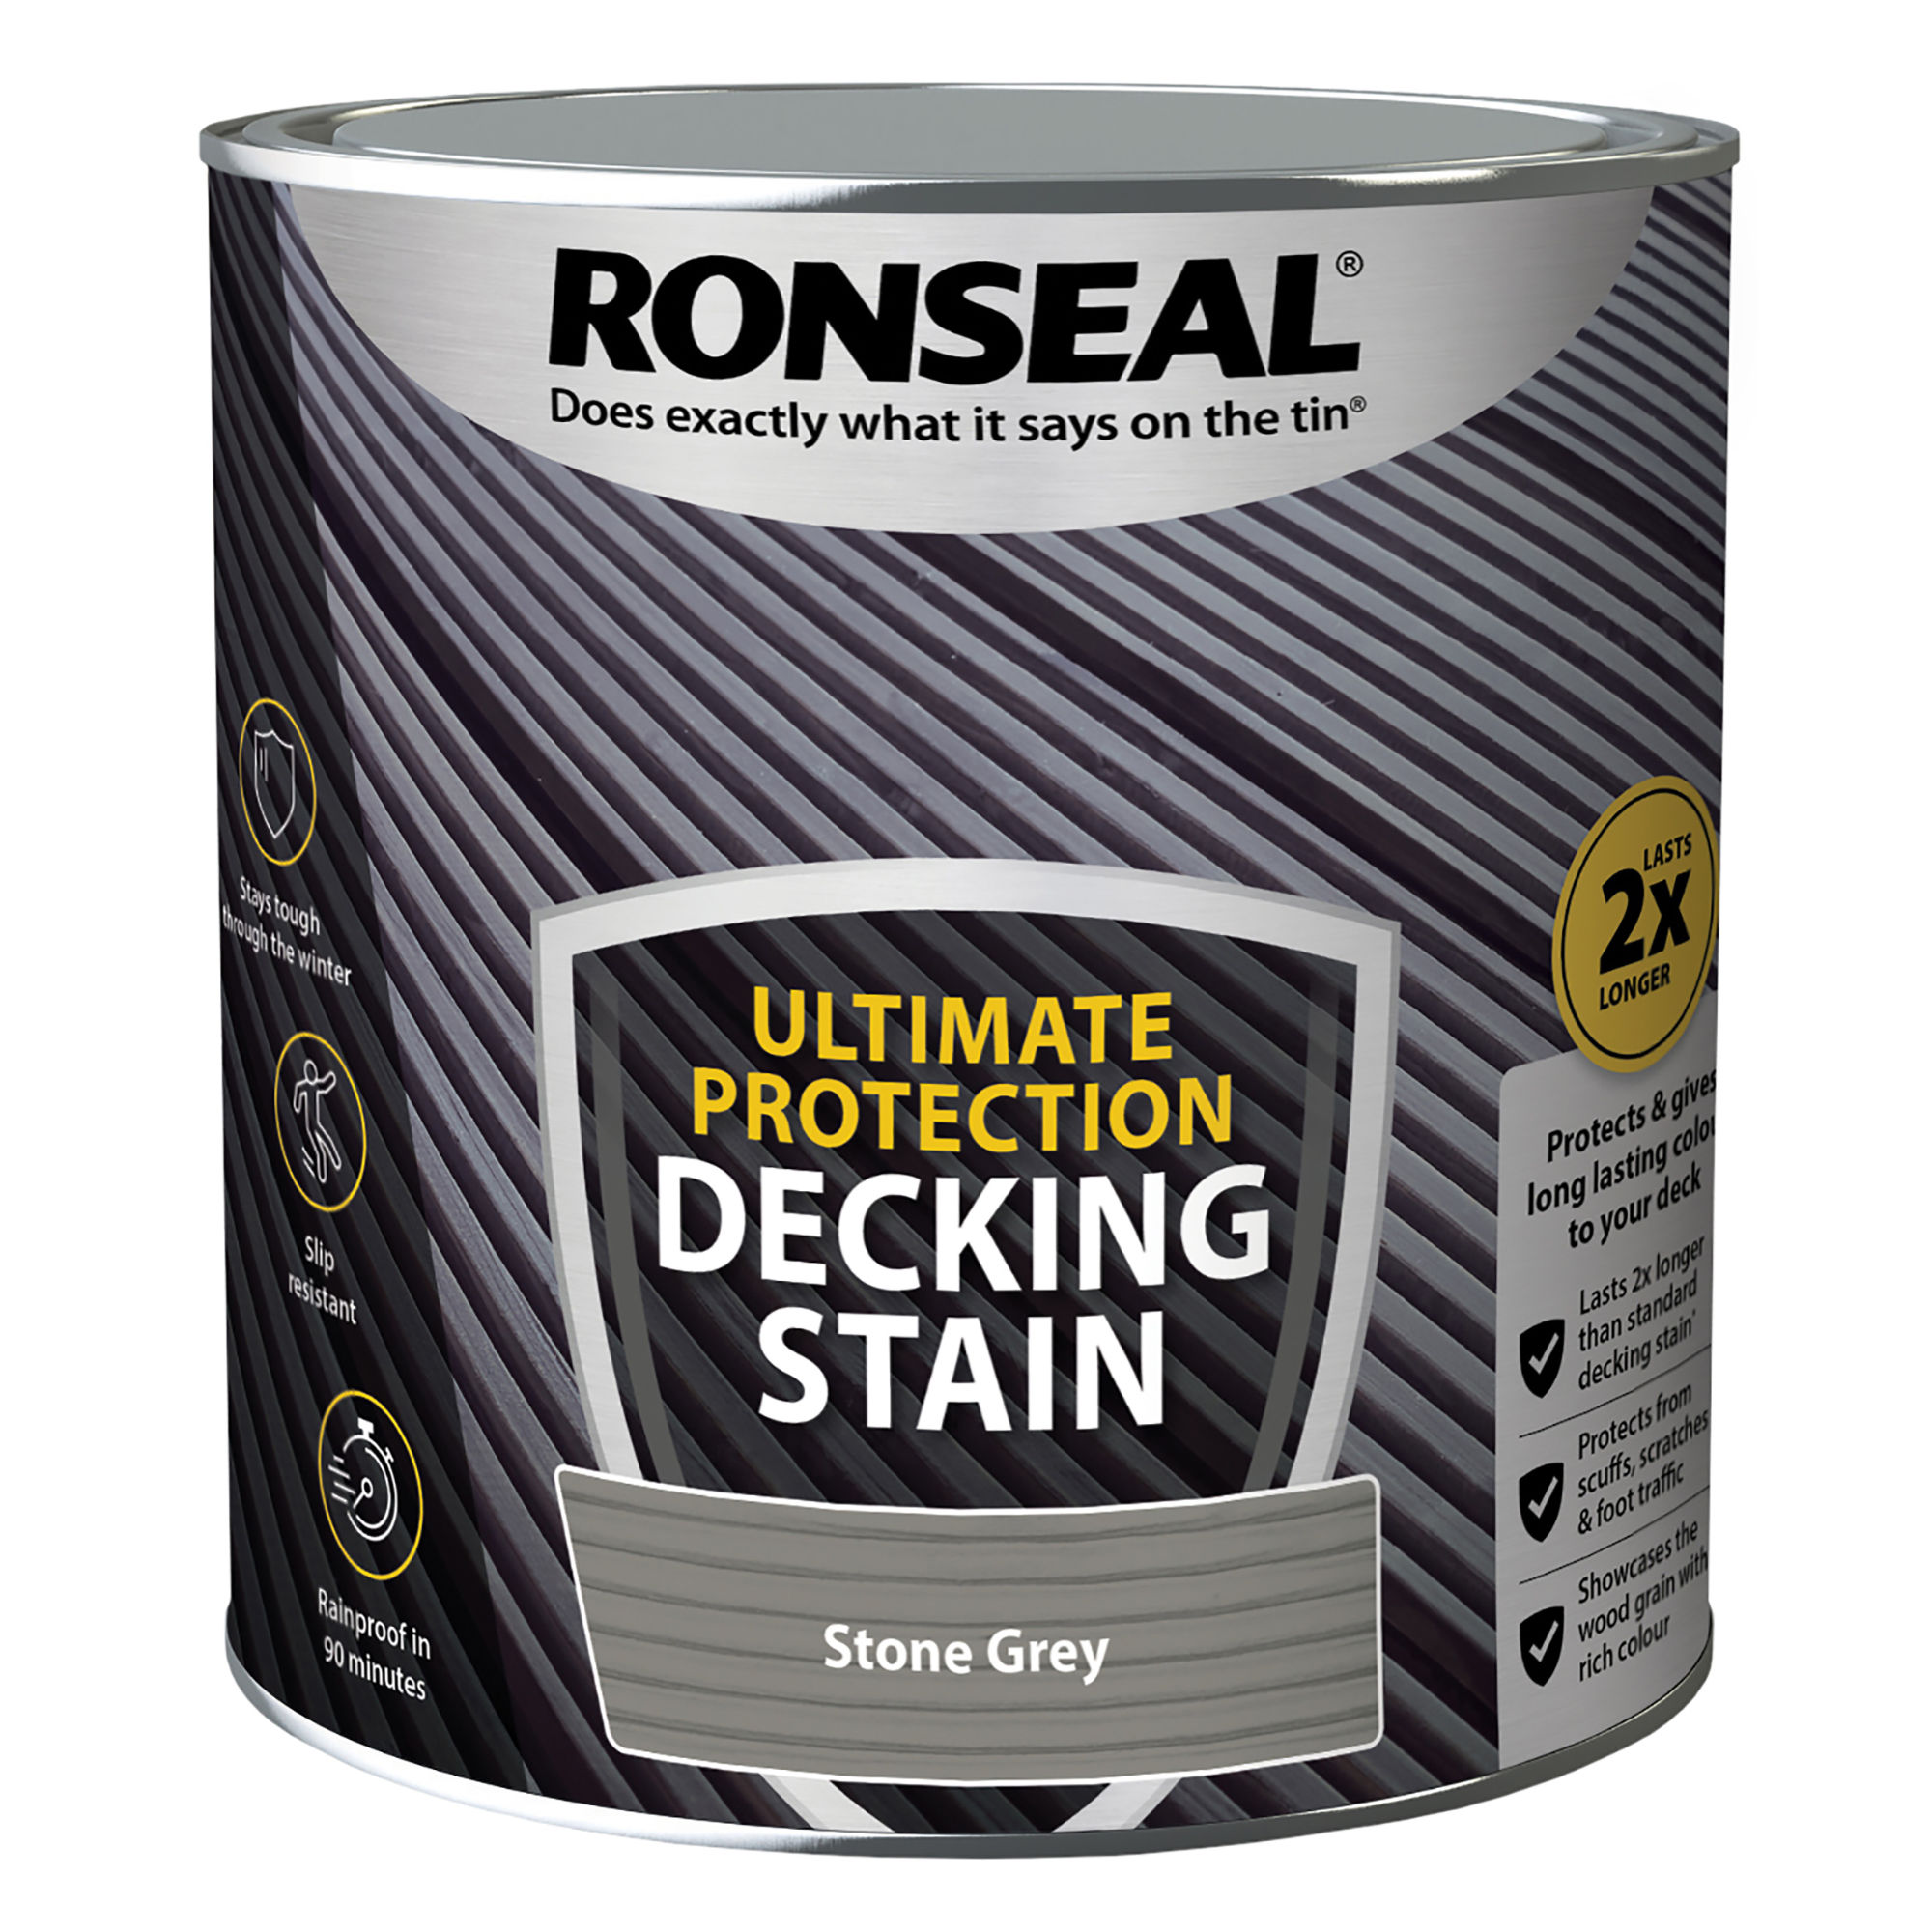 Ronseal Ultimate Protection Decking Stain - Stone Grey (2.5L)